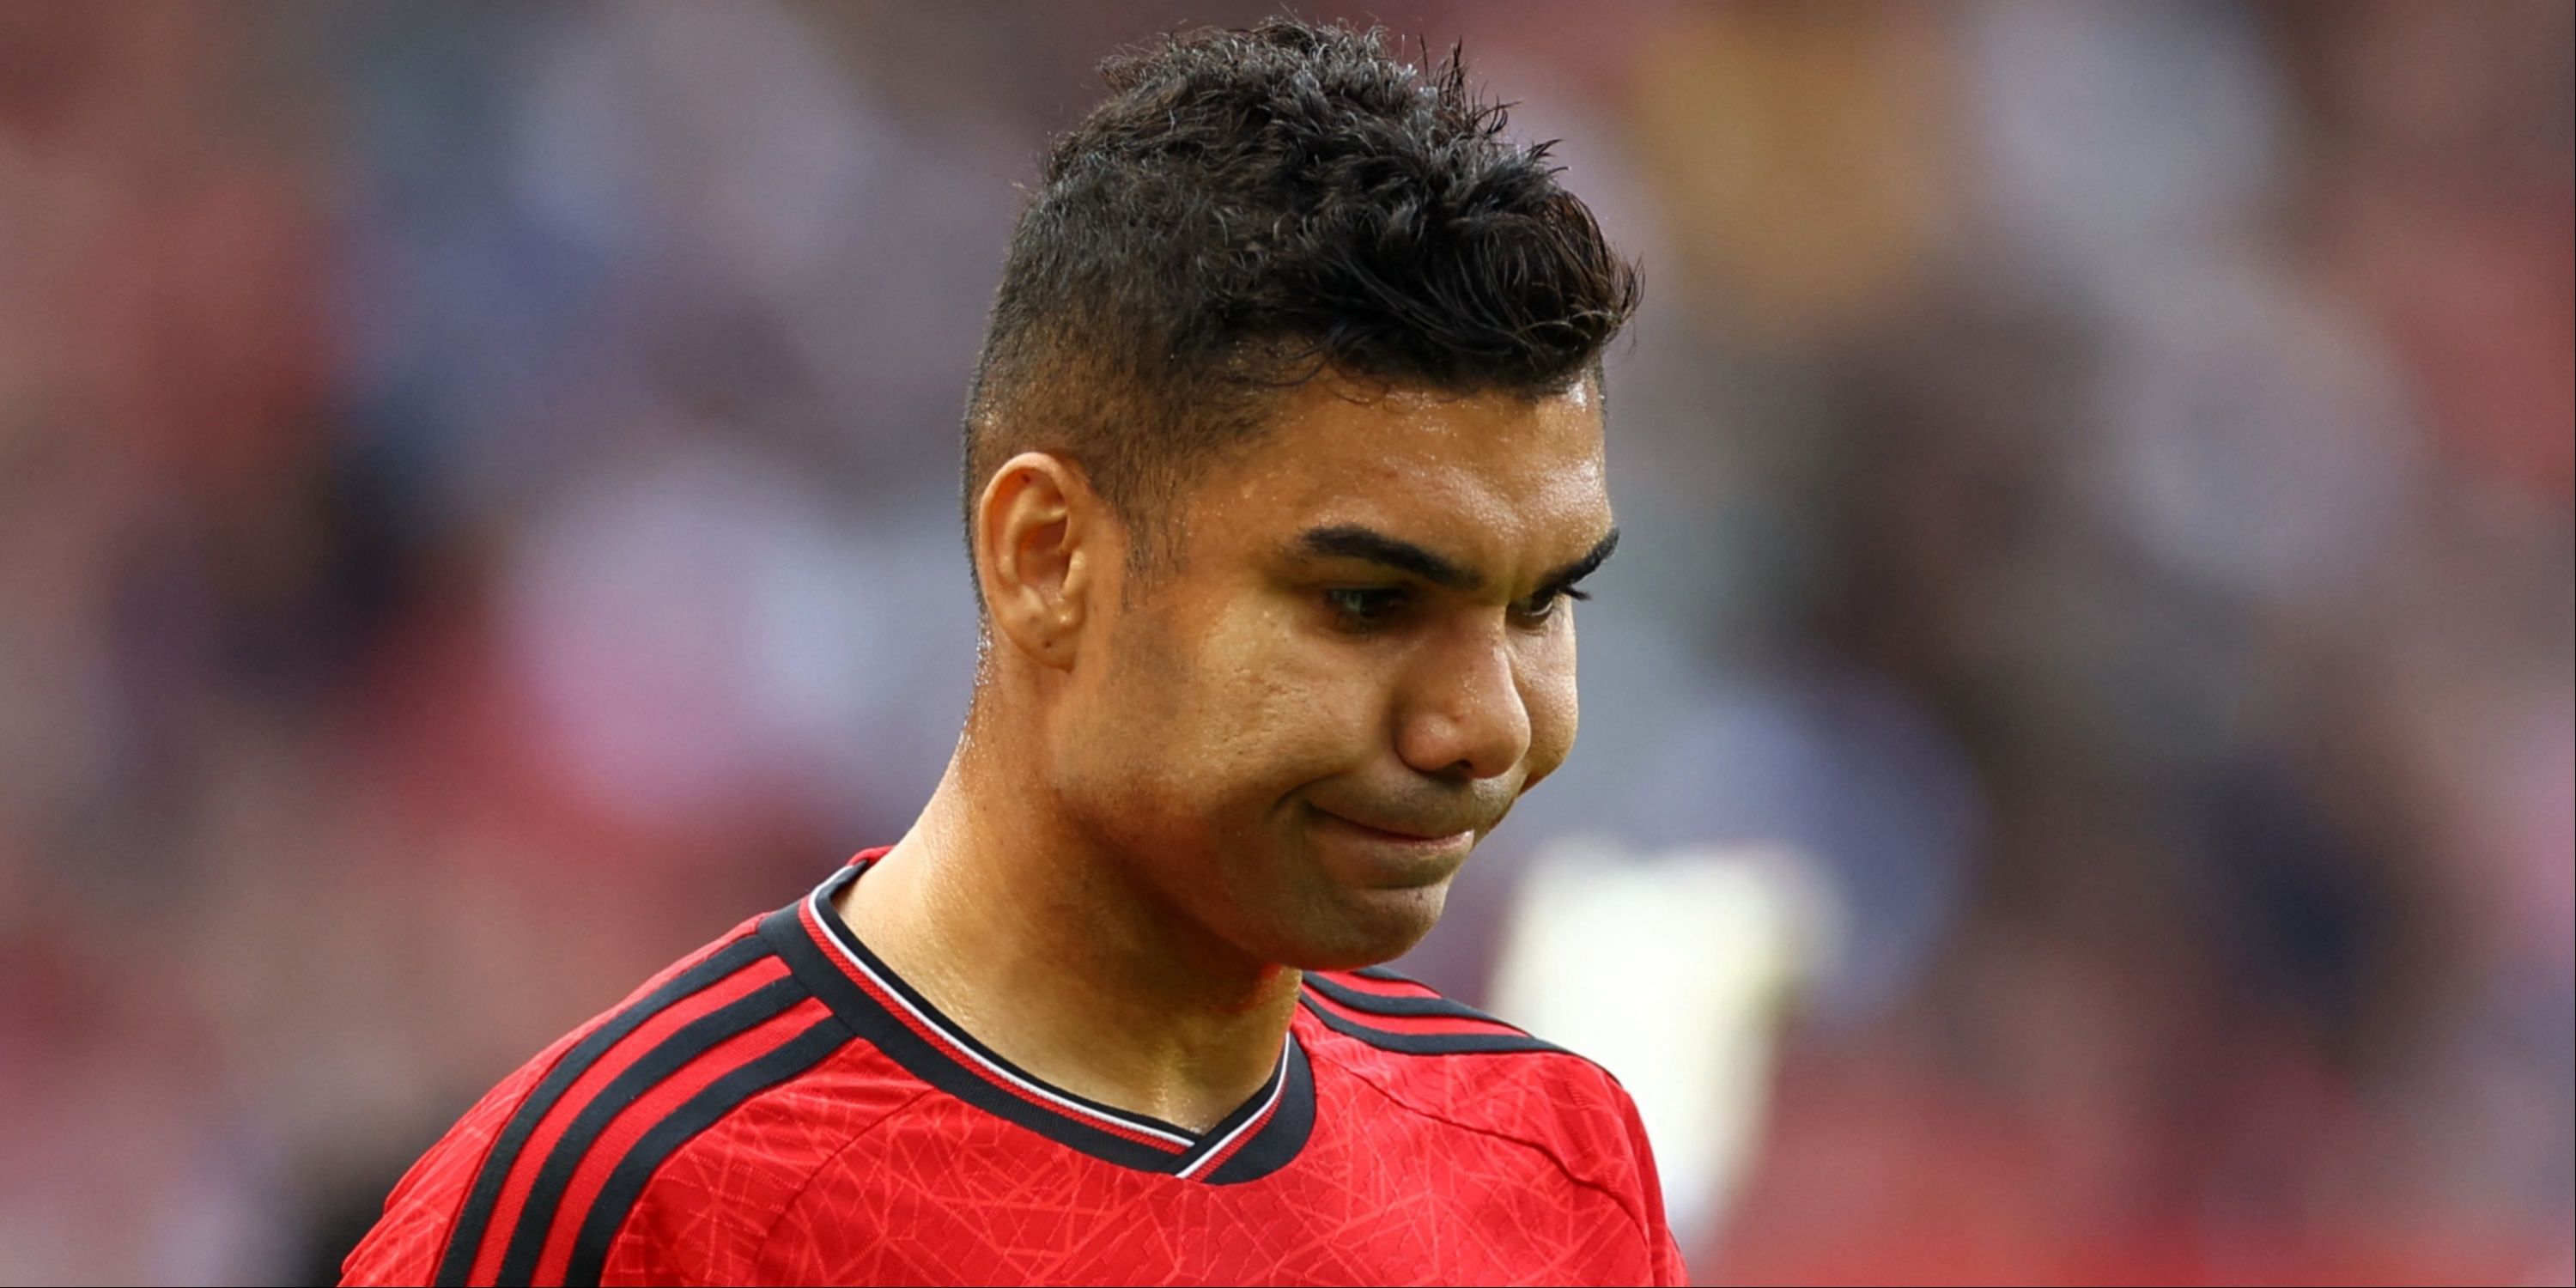 Casemiro in action for Man United